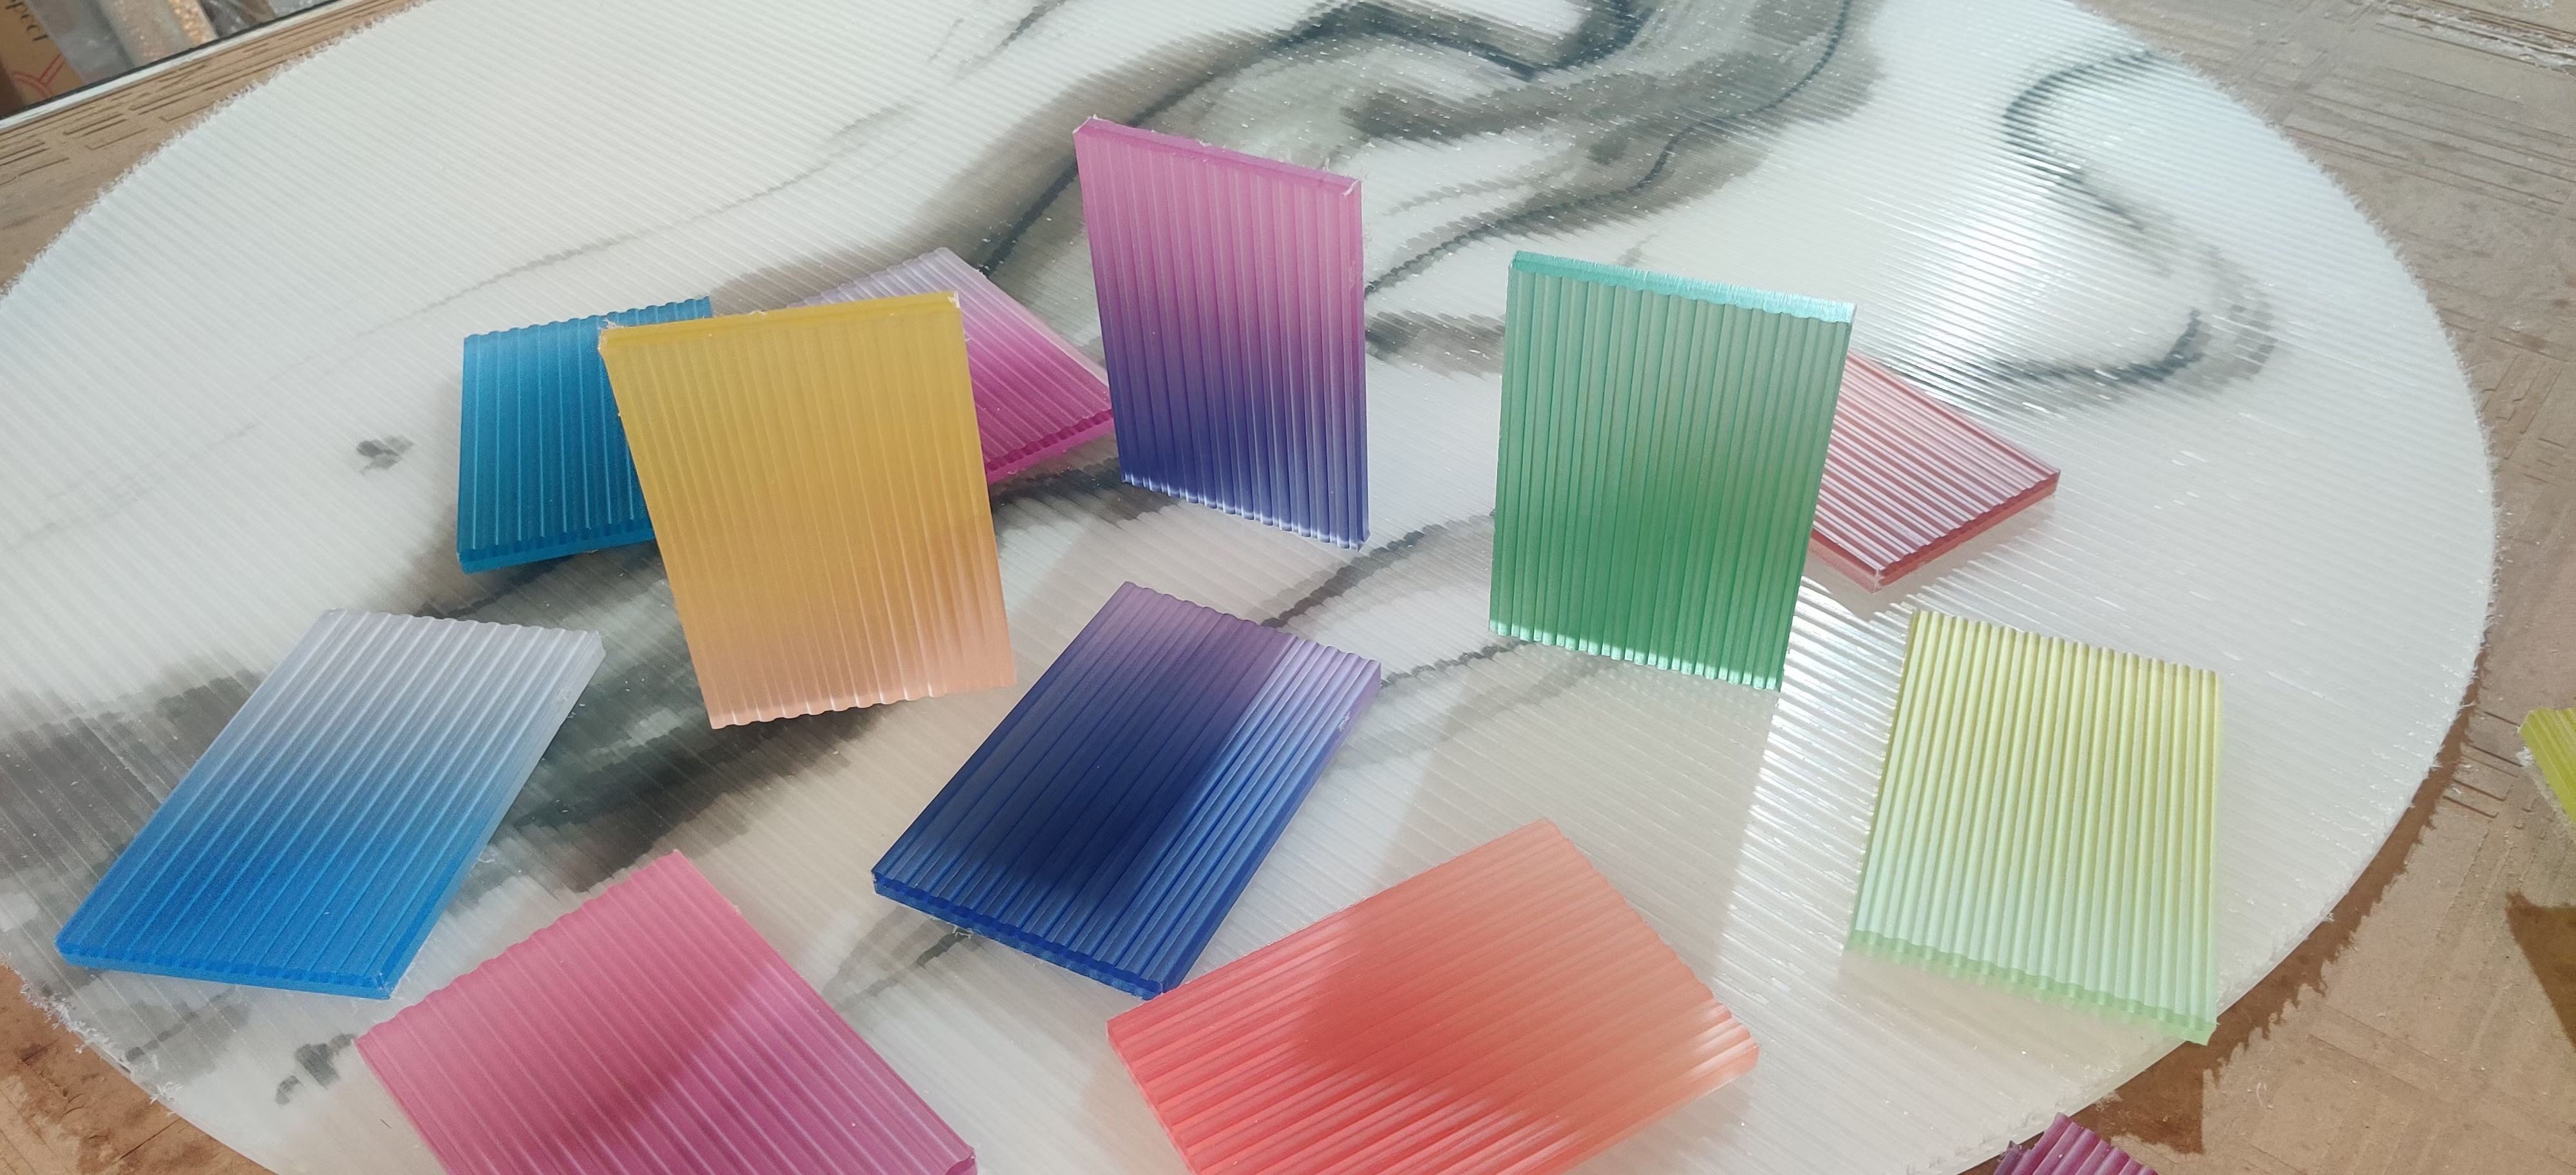 patterned acrylic sheets for laser cutting